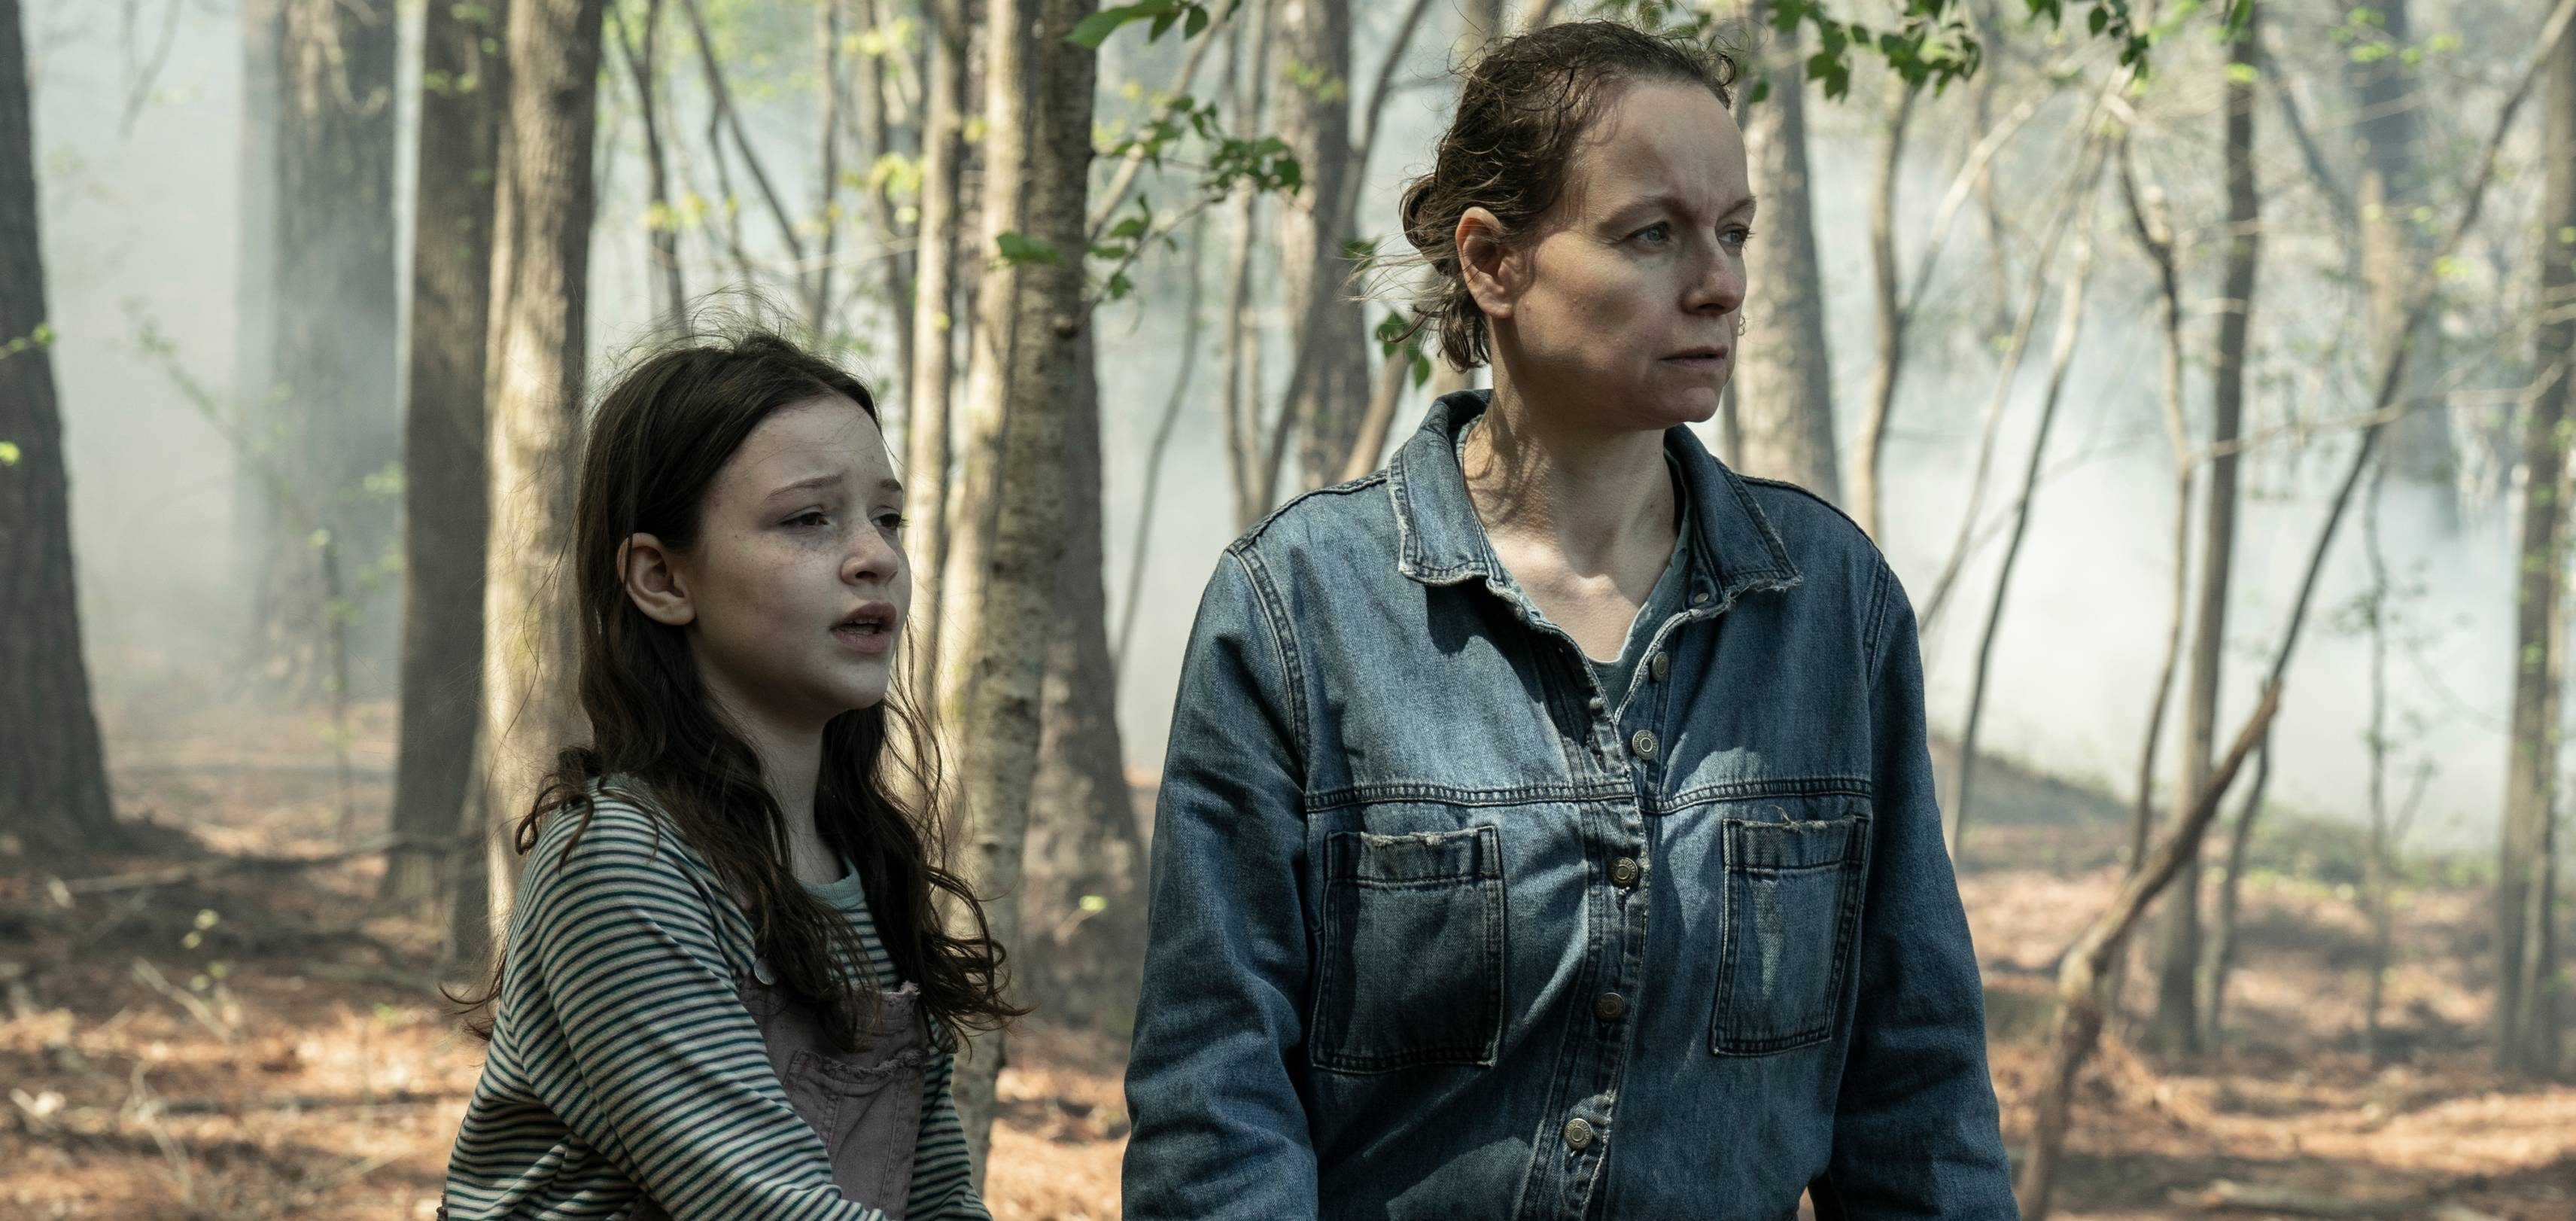 Tales of the Walking Dead Episode 3 Recap and Ending, Explained